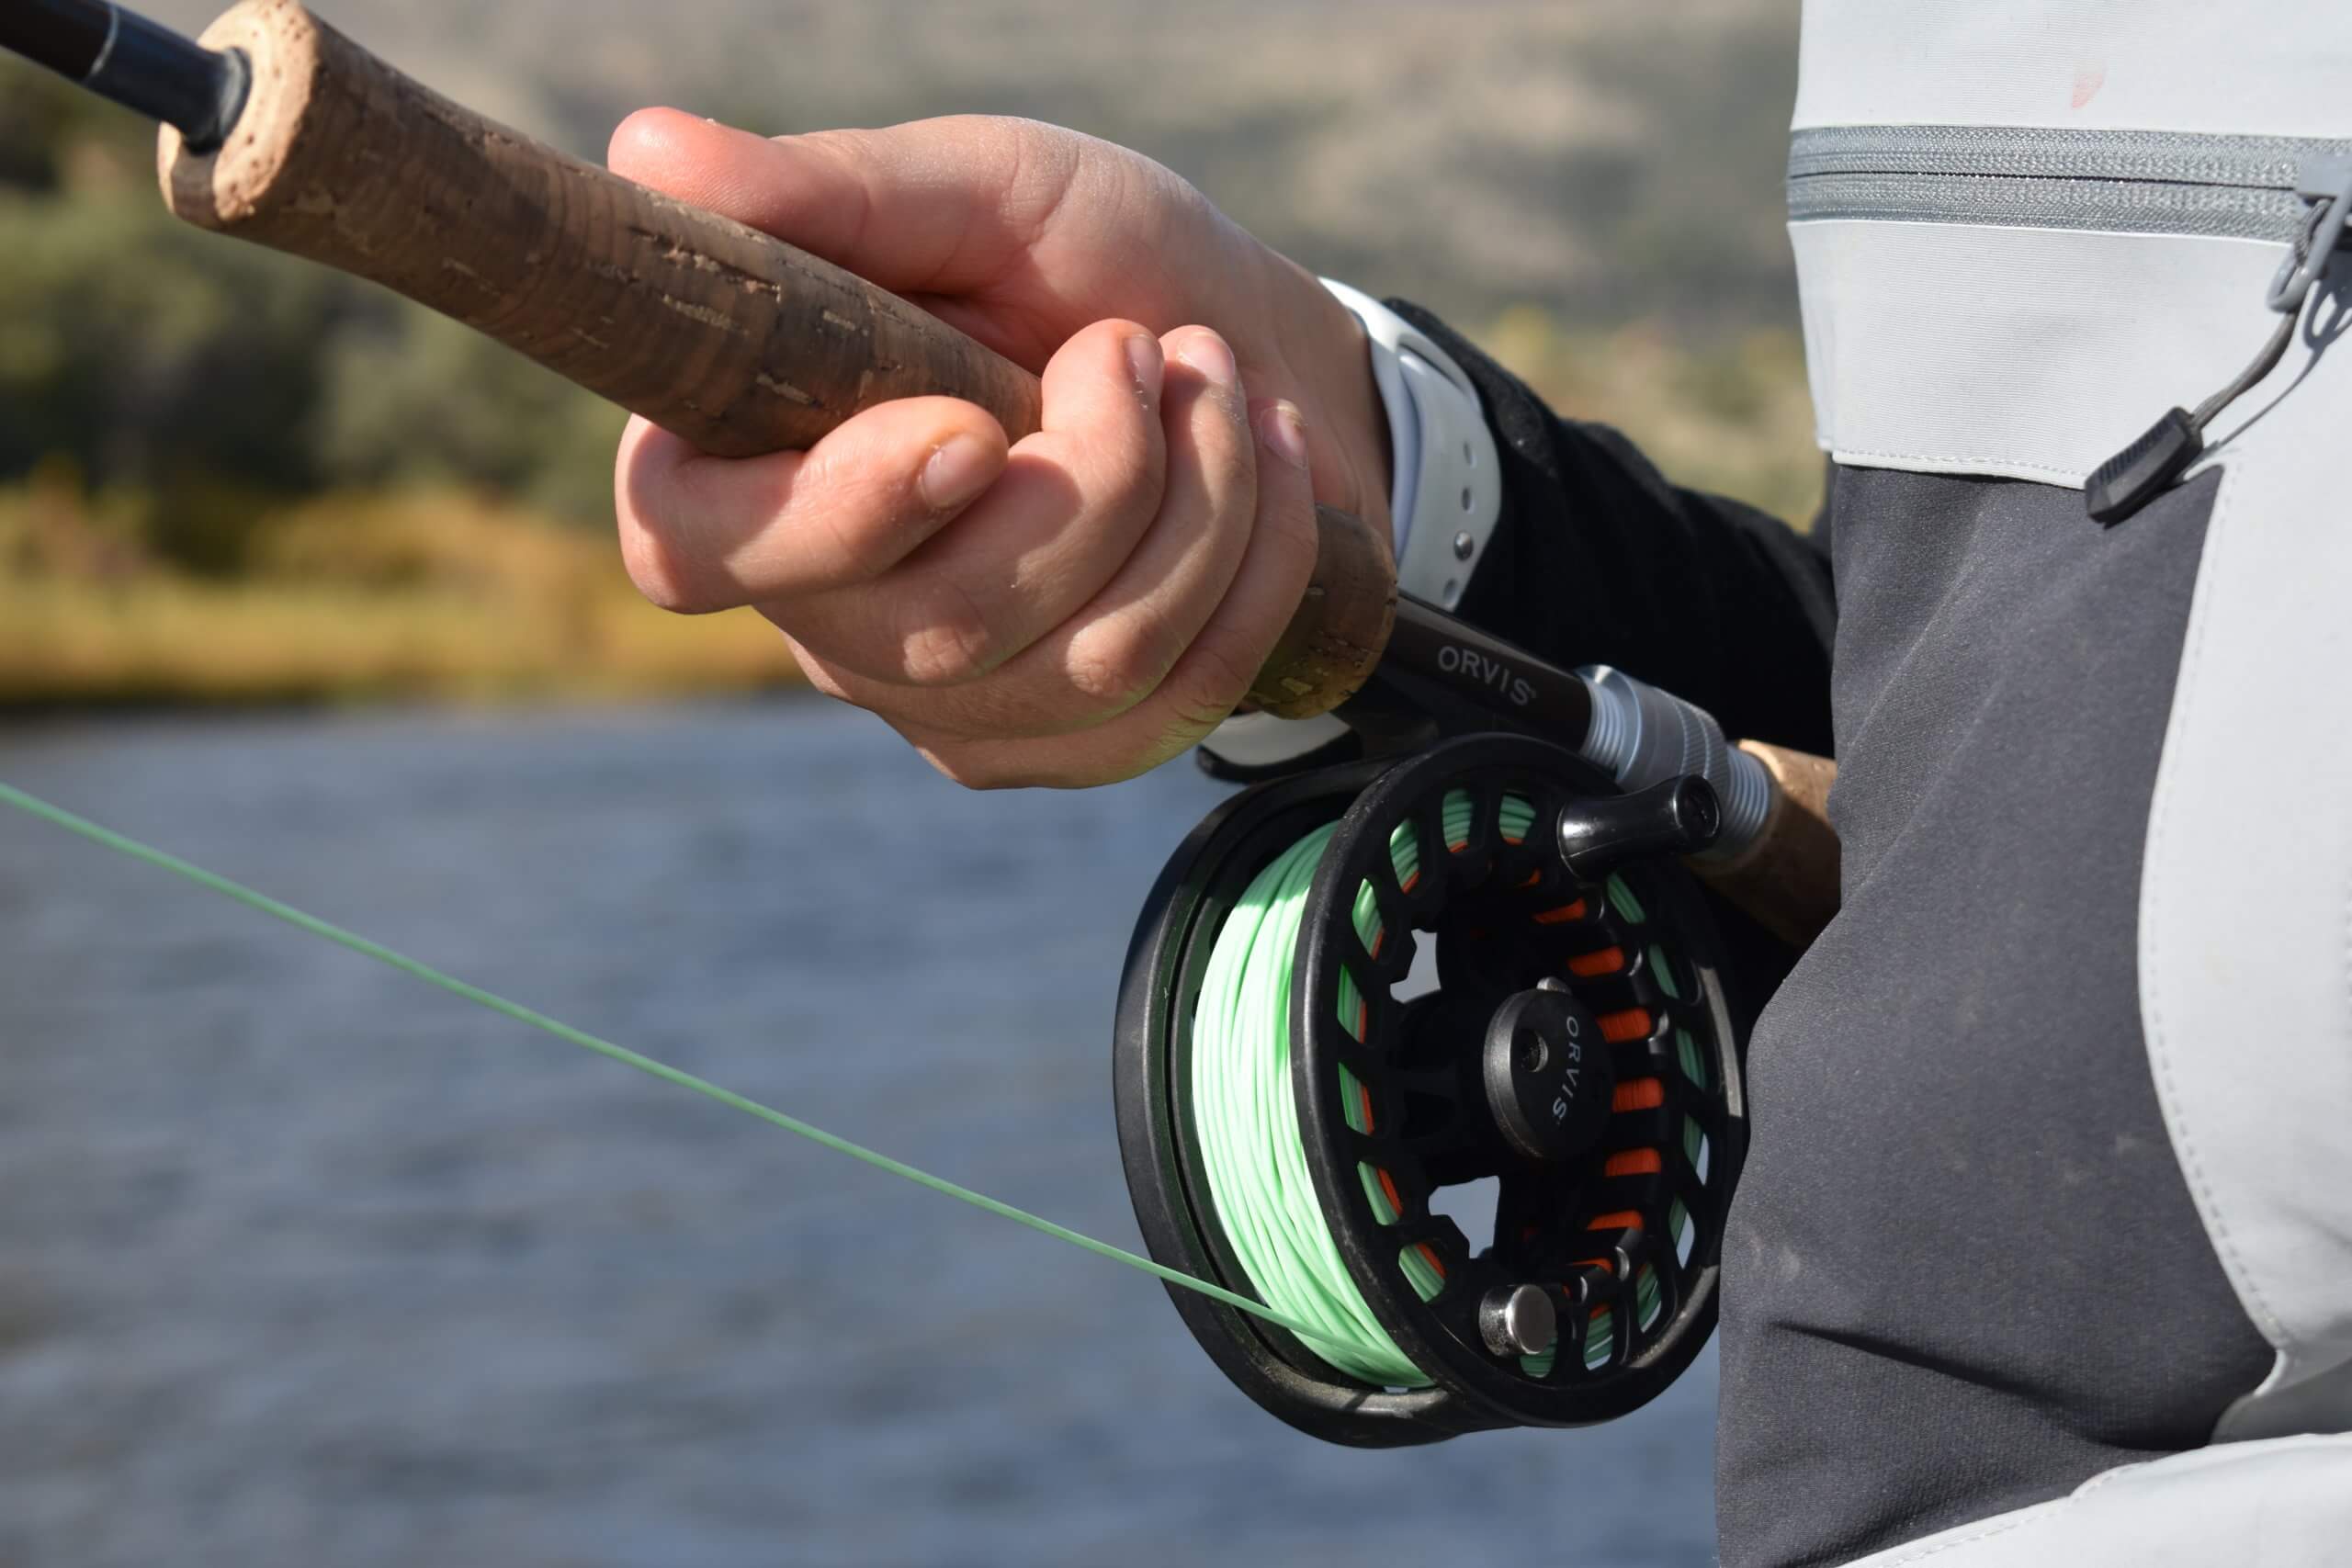 How to Pick a Fly-Fishing Outfit